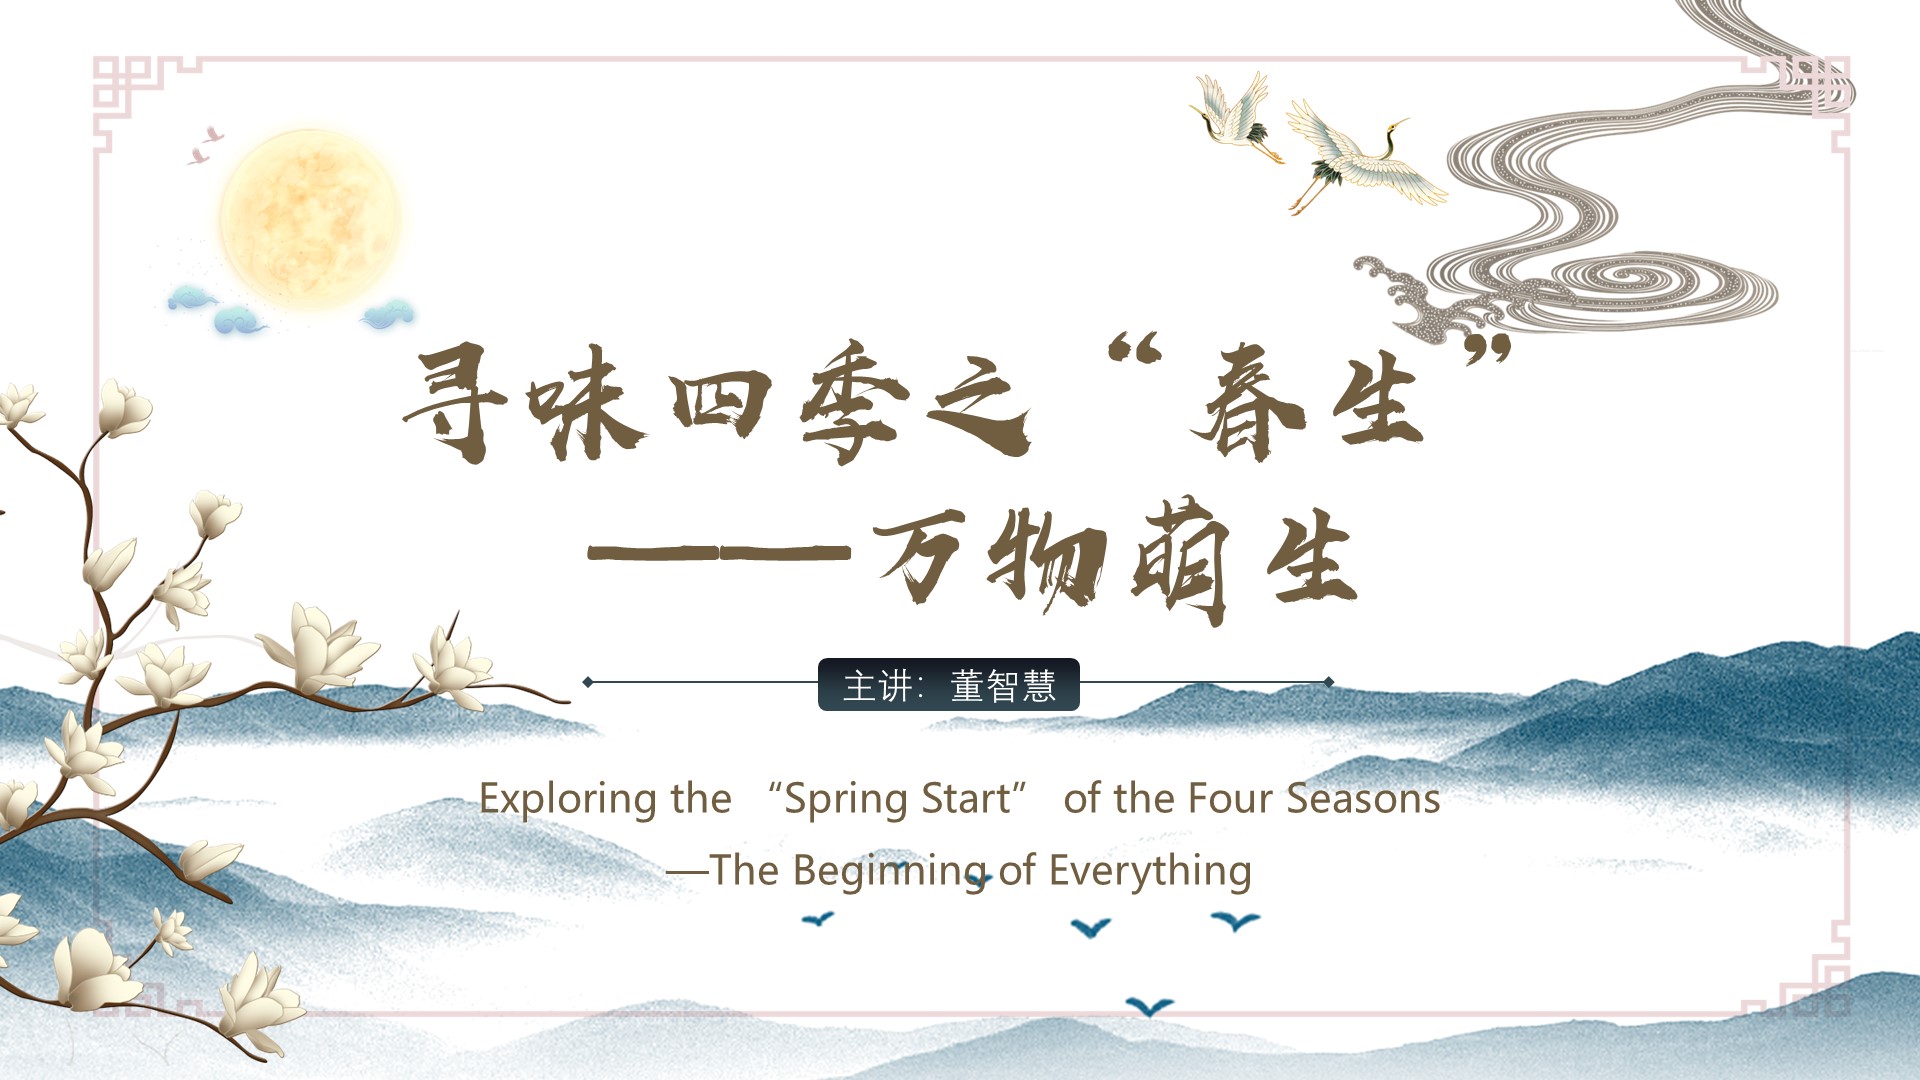 Part I: Exploring the “Spring Start” of the Four Seasons—The Beginning of Everything